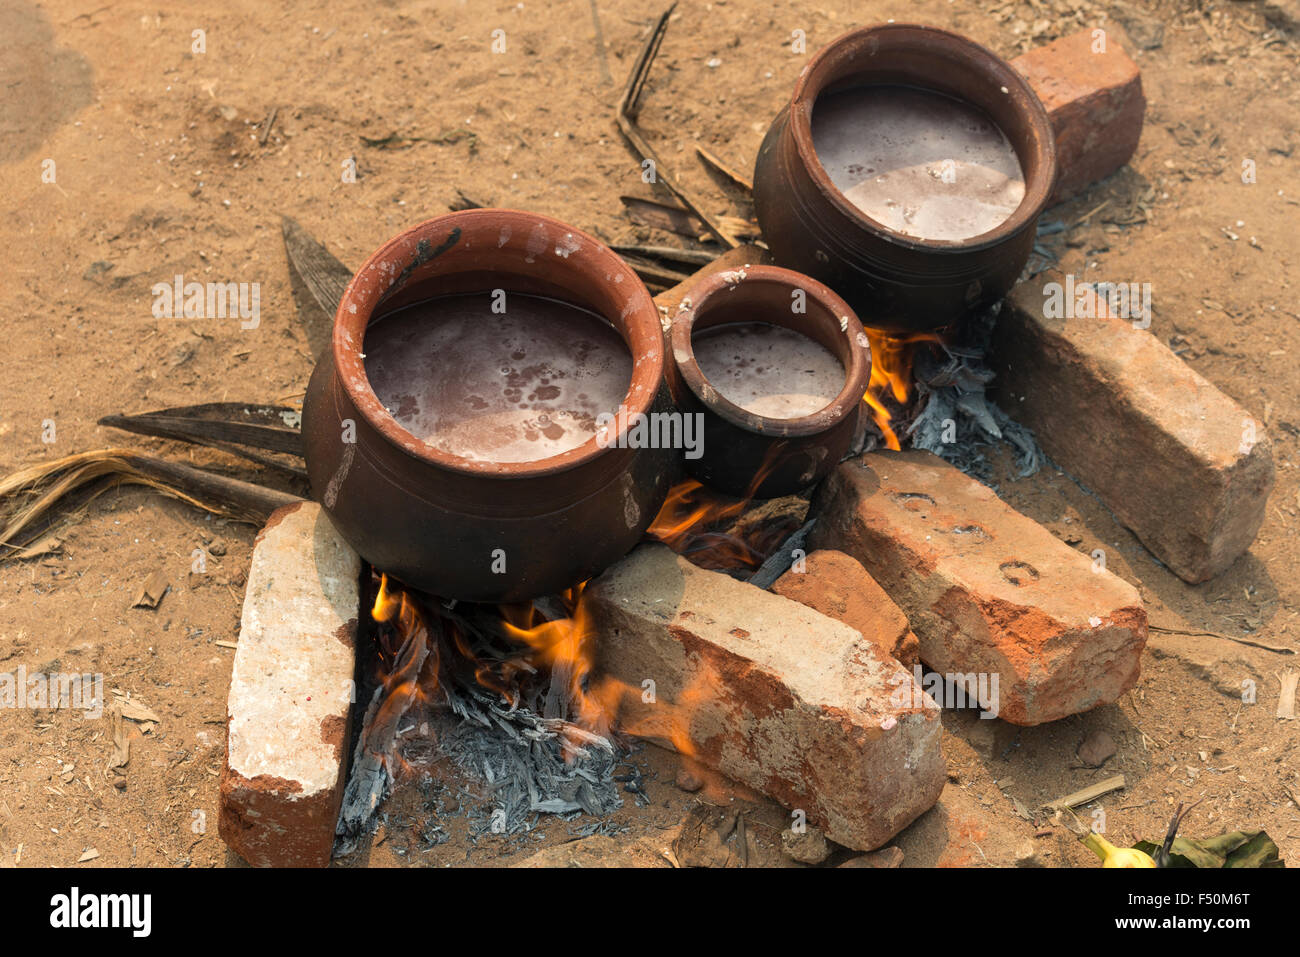 https://c8.alamy.com/comp/F50M6T/clay-pots-are-used-for-cooking-in-a-busy-street-during-the-pongala-F50M6T.jpg